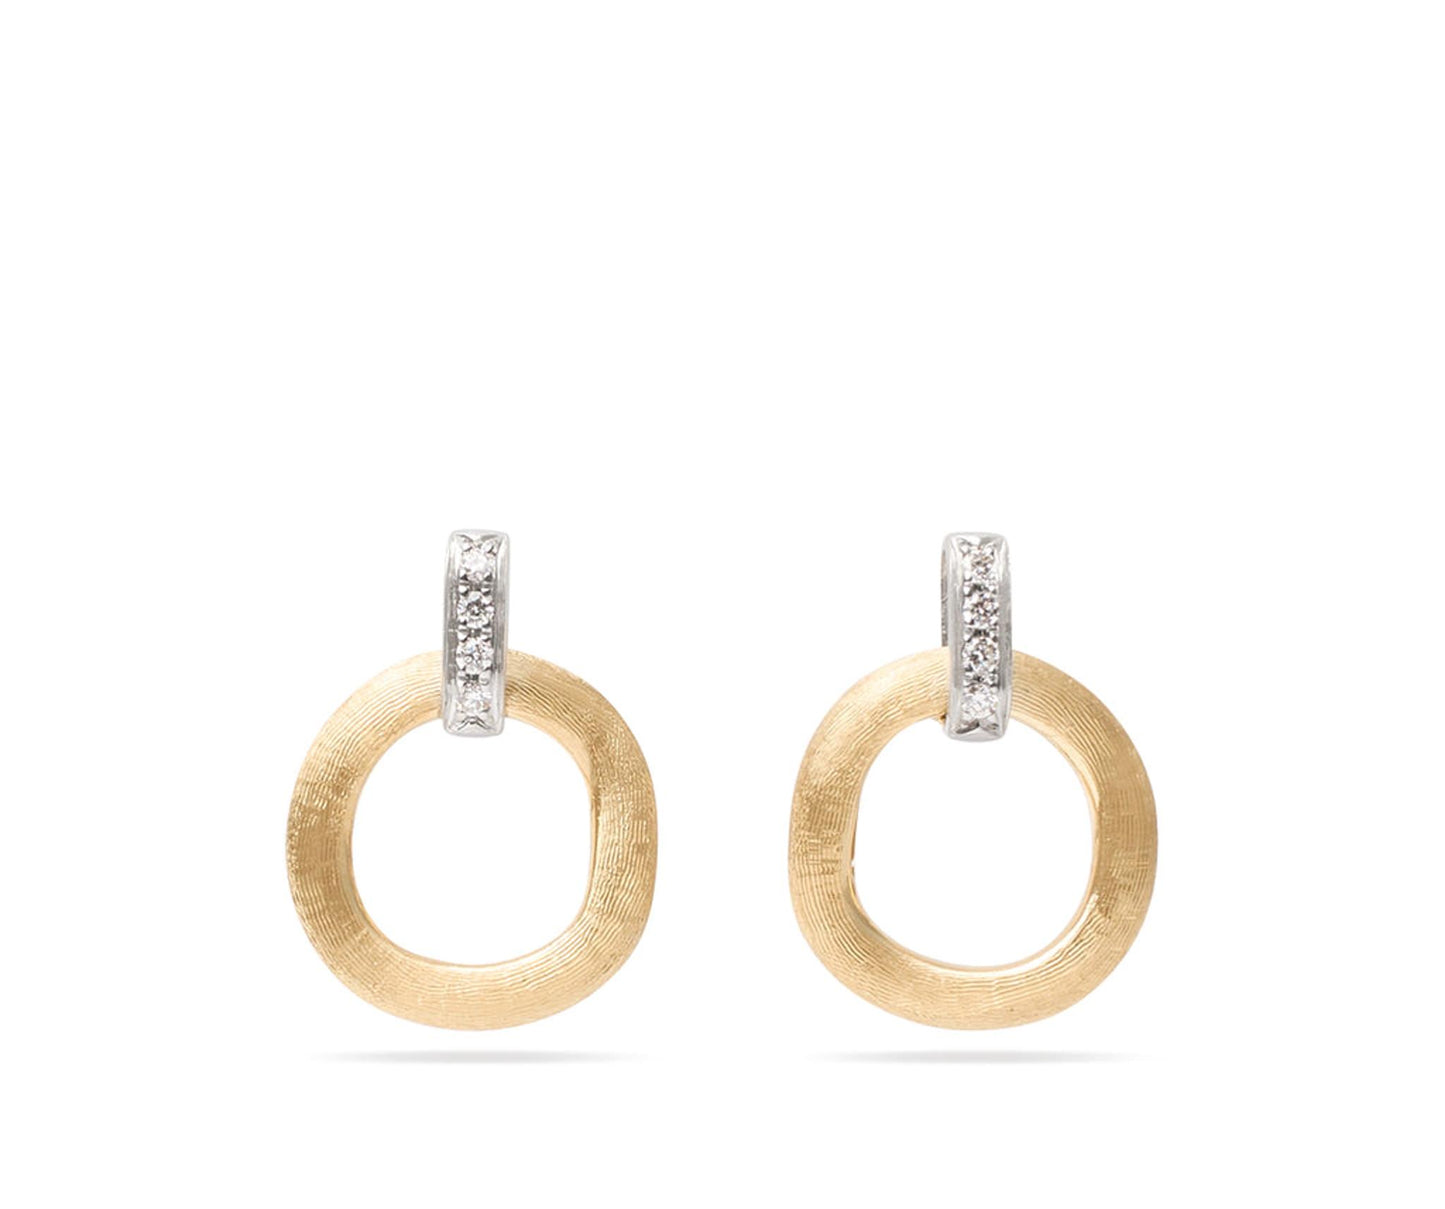 Marco Bicego Jaipur Gold Drop Earrings with Diamonds